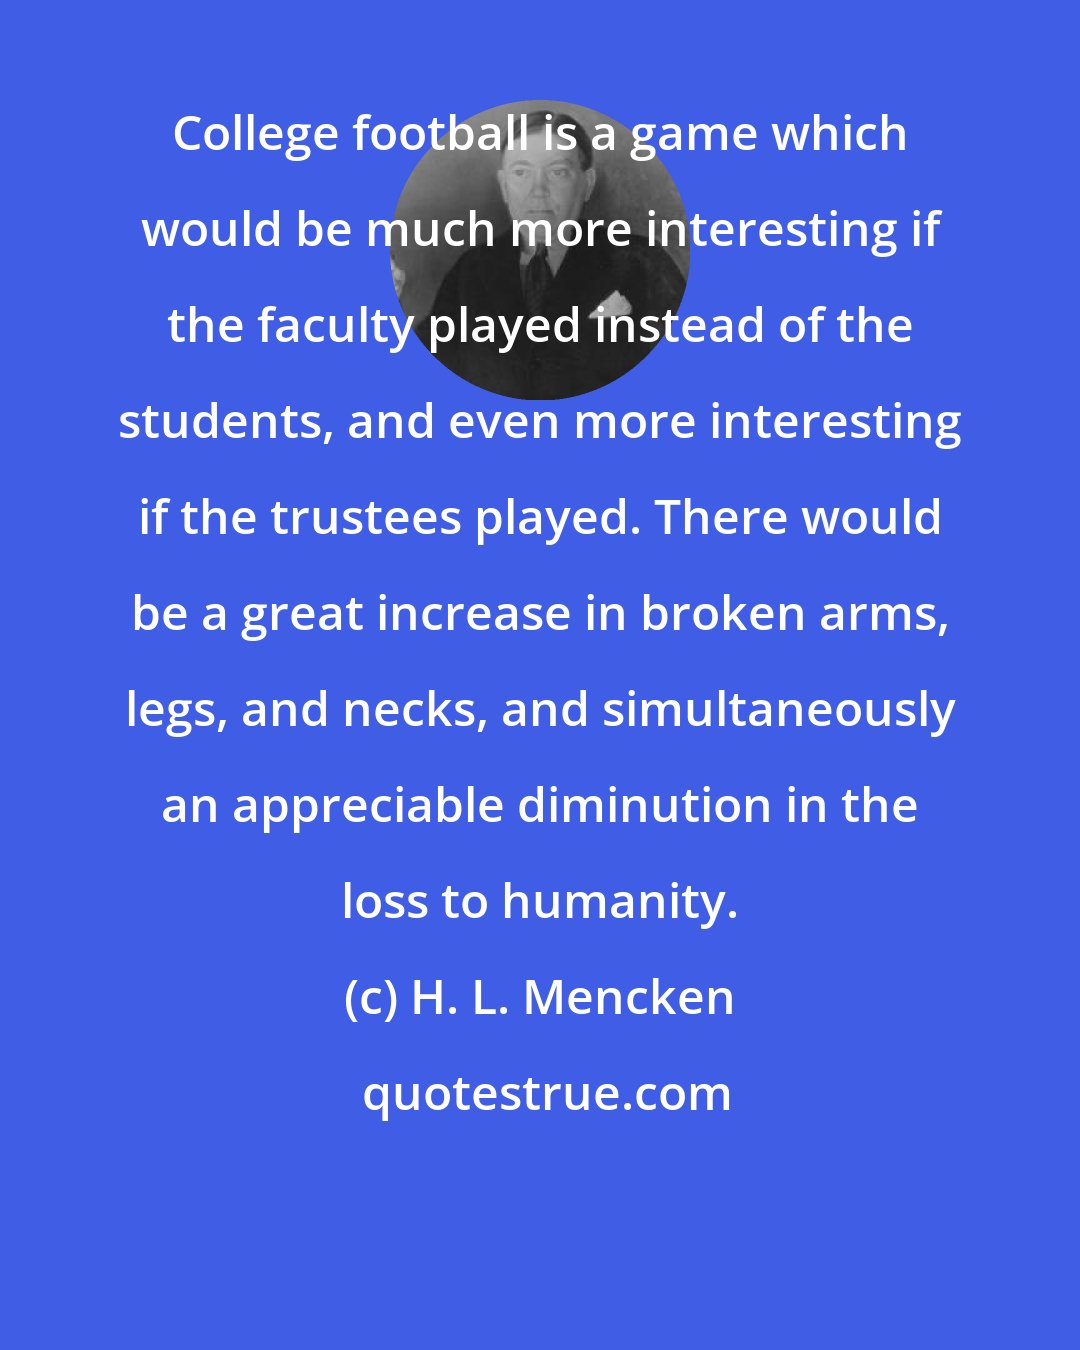 H. L. Mencken: College football is a game which would be much more interesting if the faculty played instead of the students, and even more interesting if the trustees played. There would be a great increase in broken arms, legs, and necks, and simultaneously an appreciable diminution in the loss to humanity.